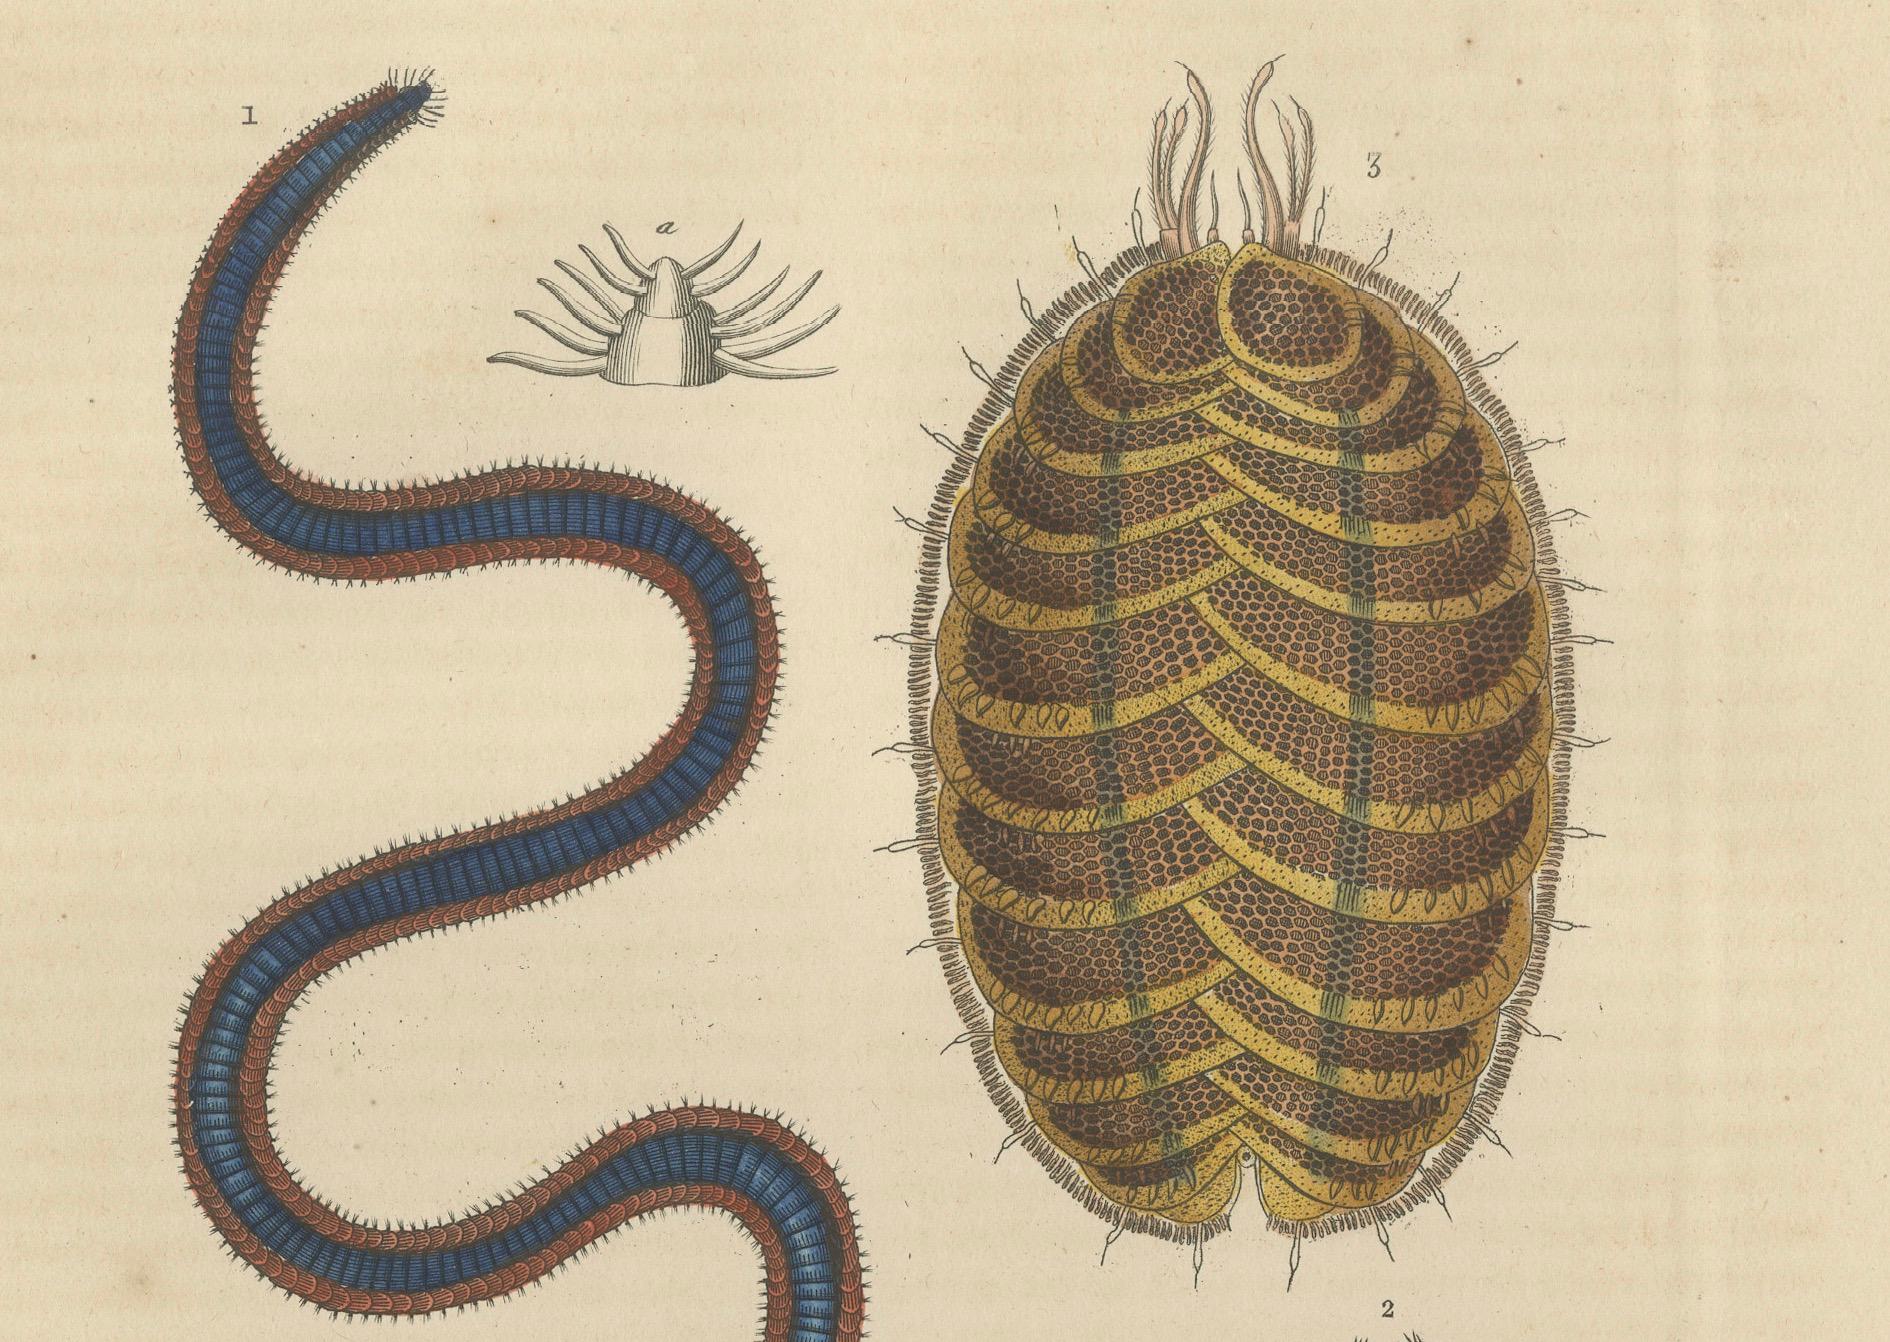 Mid-19th Century Varieties of Marine Invertebrates: Spined Worms and Bicolored Leech, 1845 For Sale